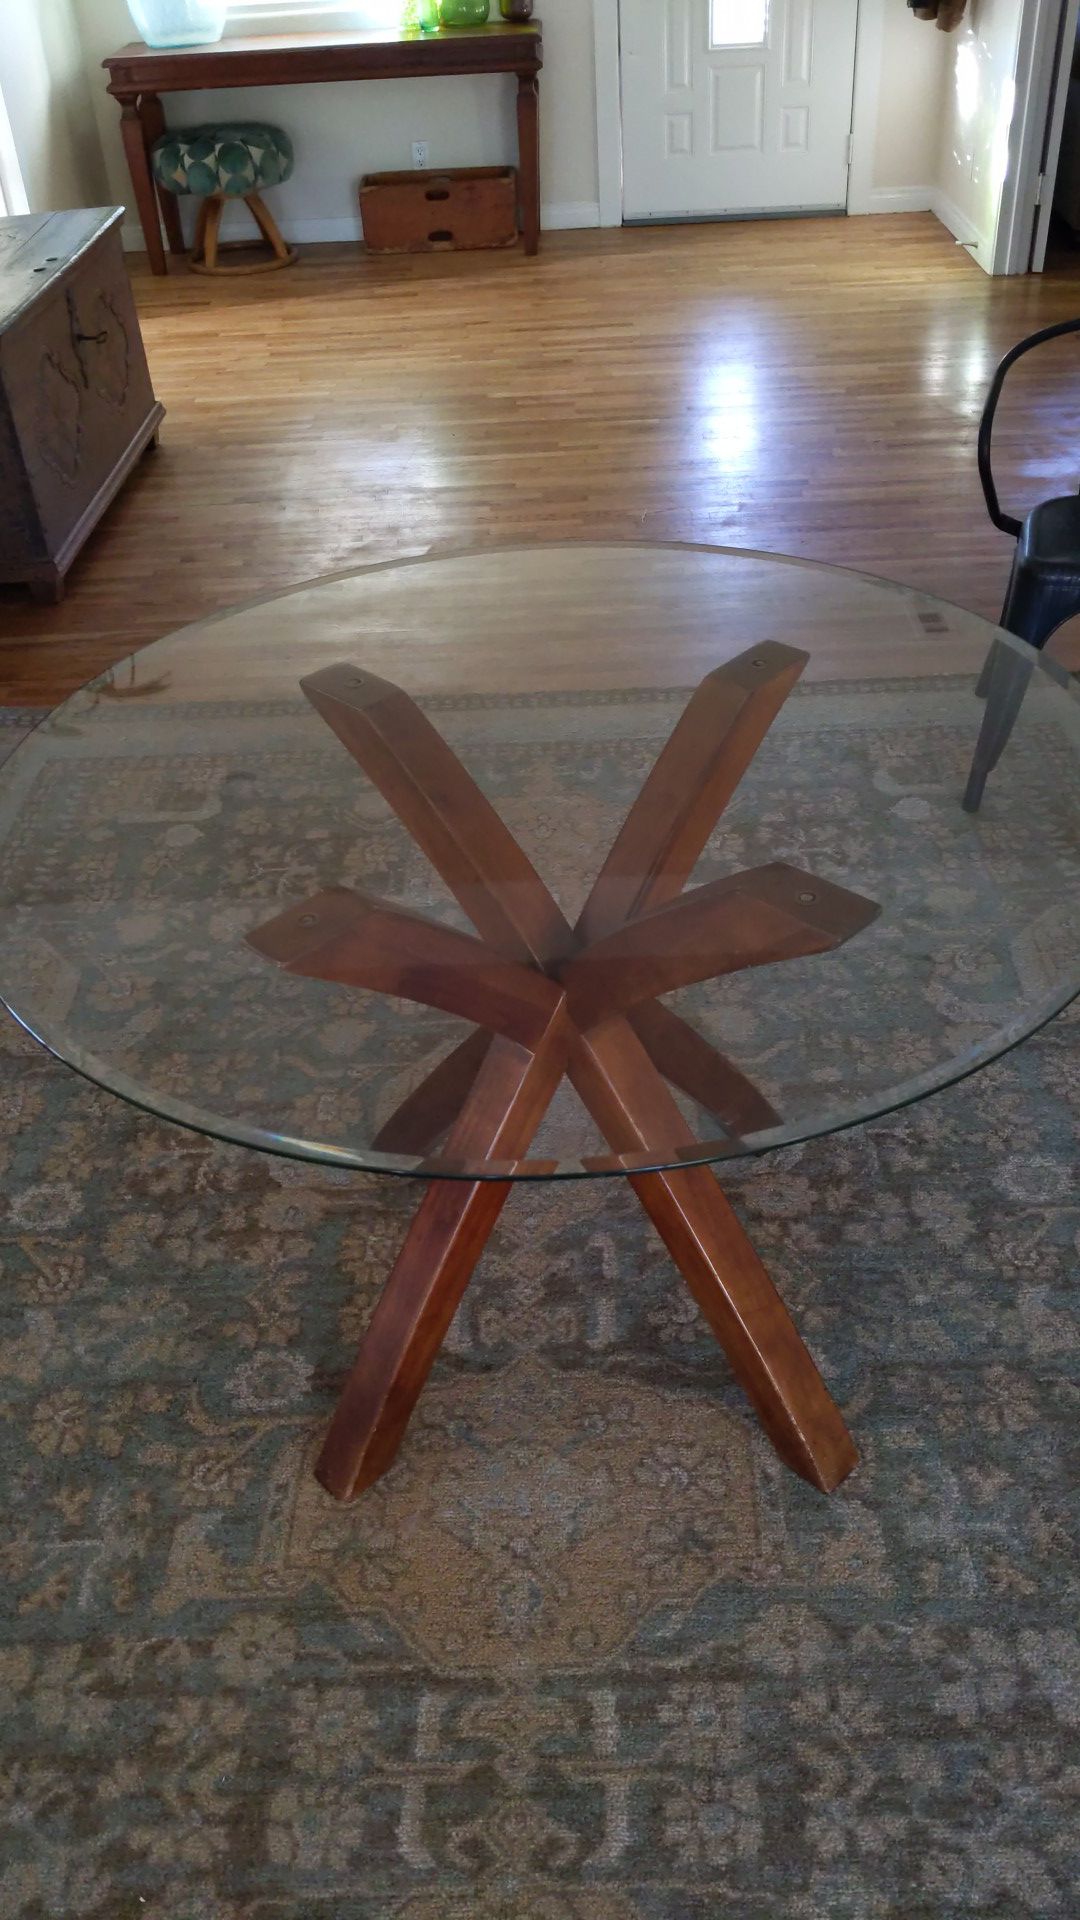 Beautiful Round Glass Mid Century Dining Table!